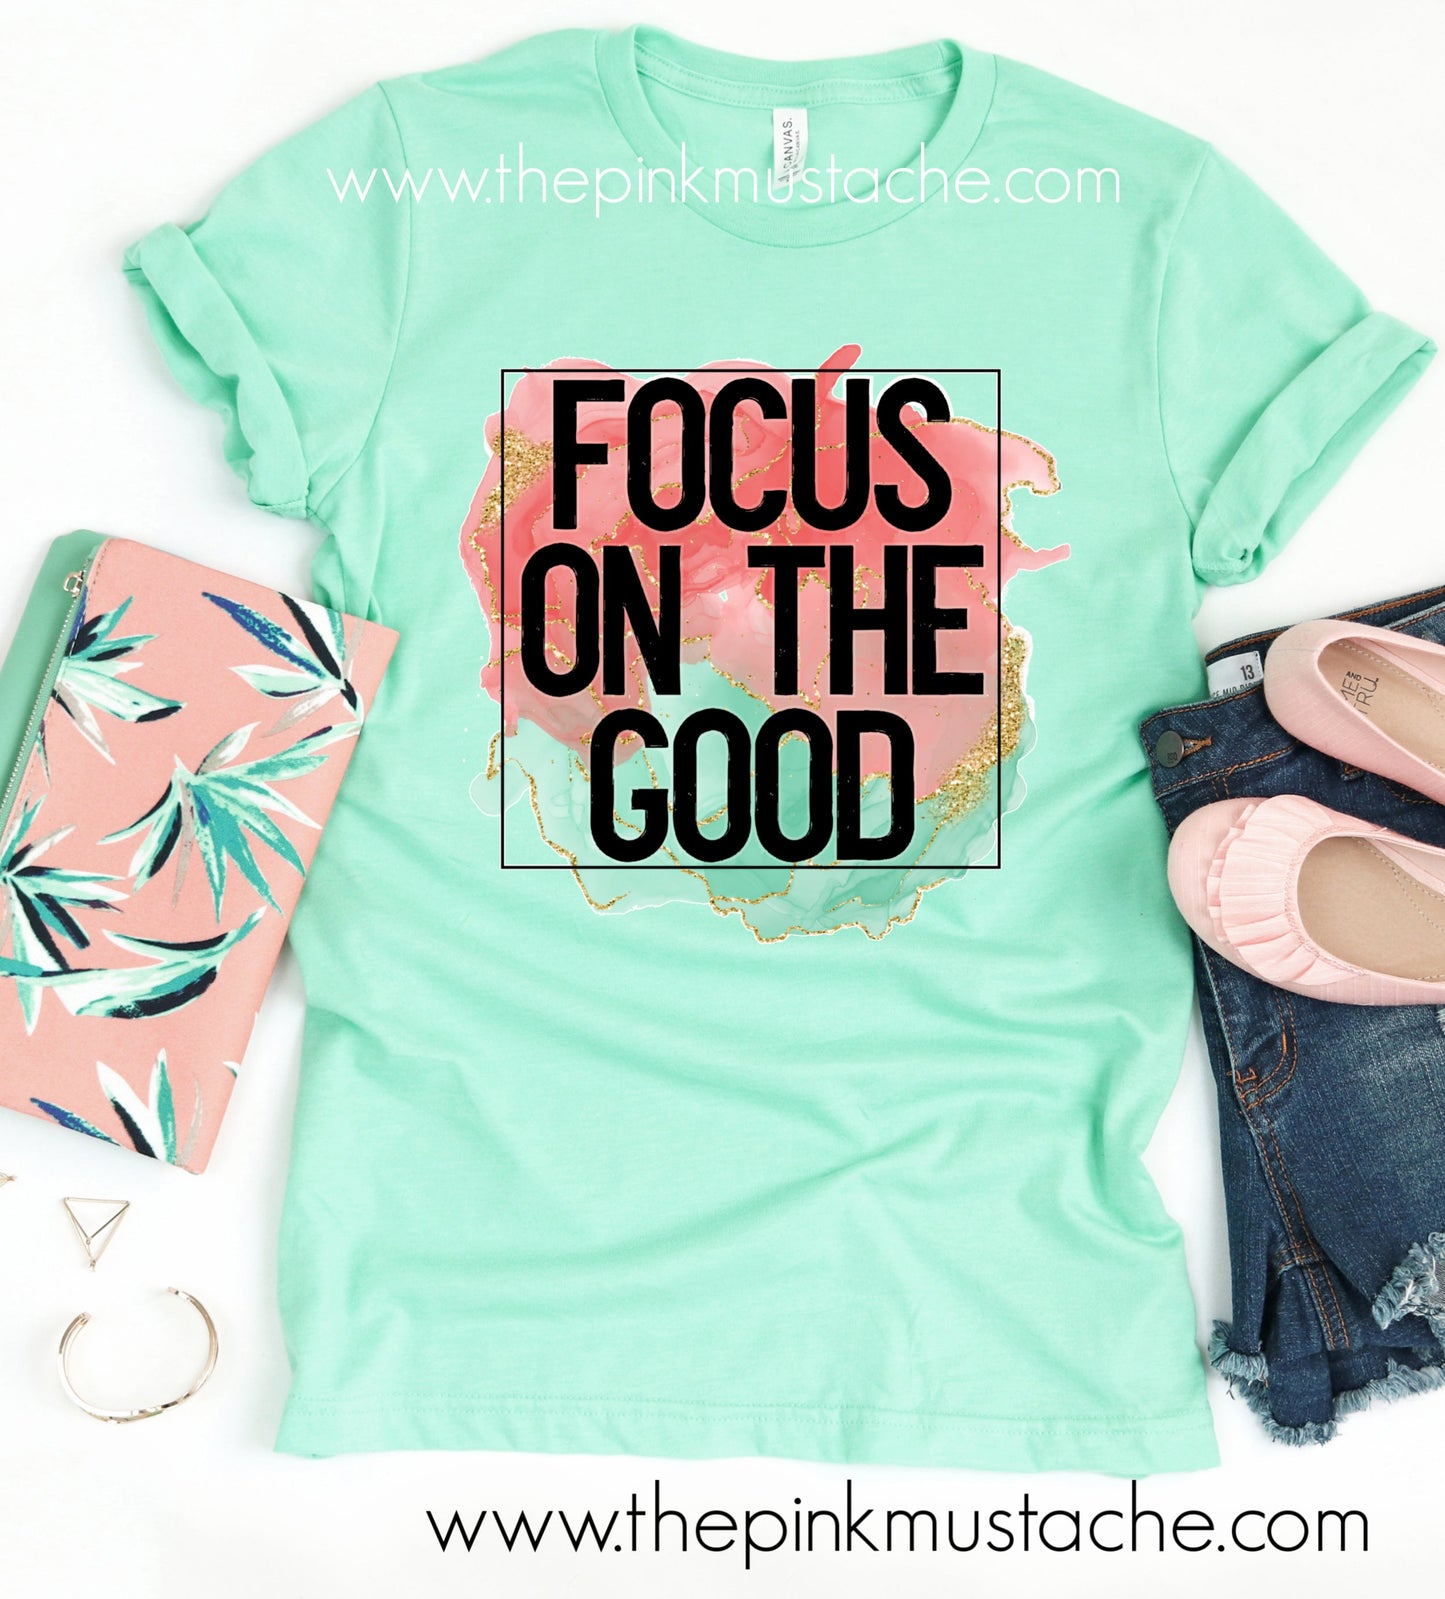 Focus on the Good Tee / Bella Canvas Inspiring Soft Shirt / Mommy and Me/ Teal / Mint